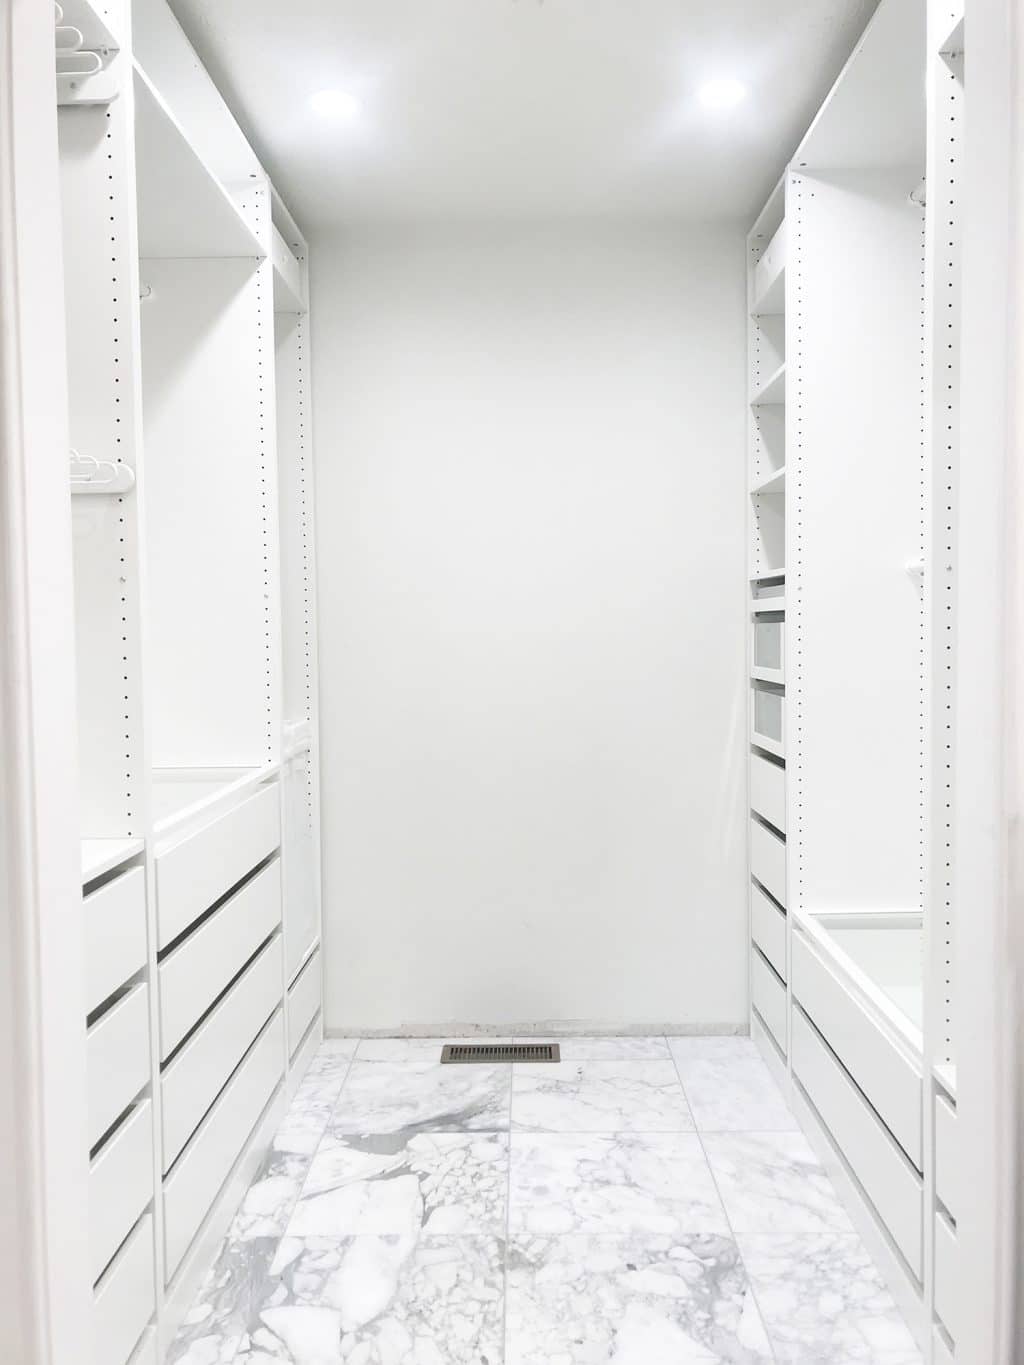 Installing Our Ikea Pax Wardrobes Plus Tips For Planning And